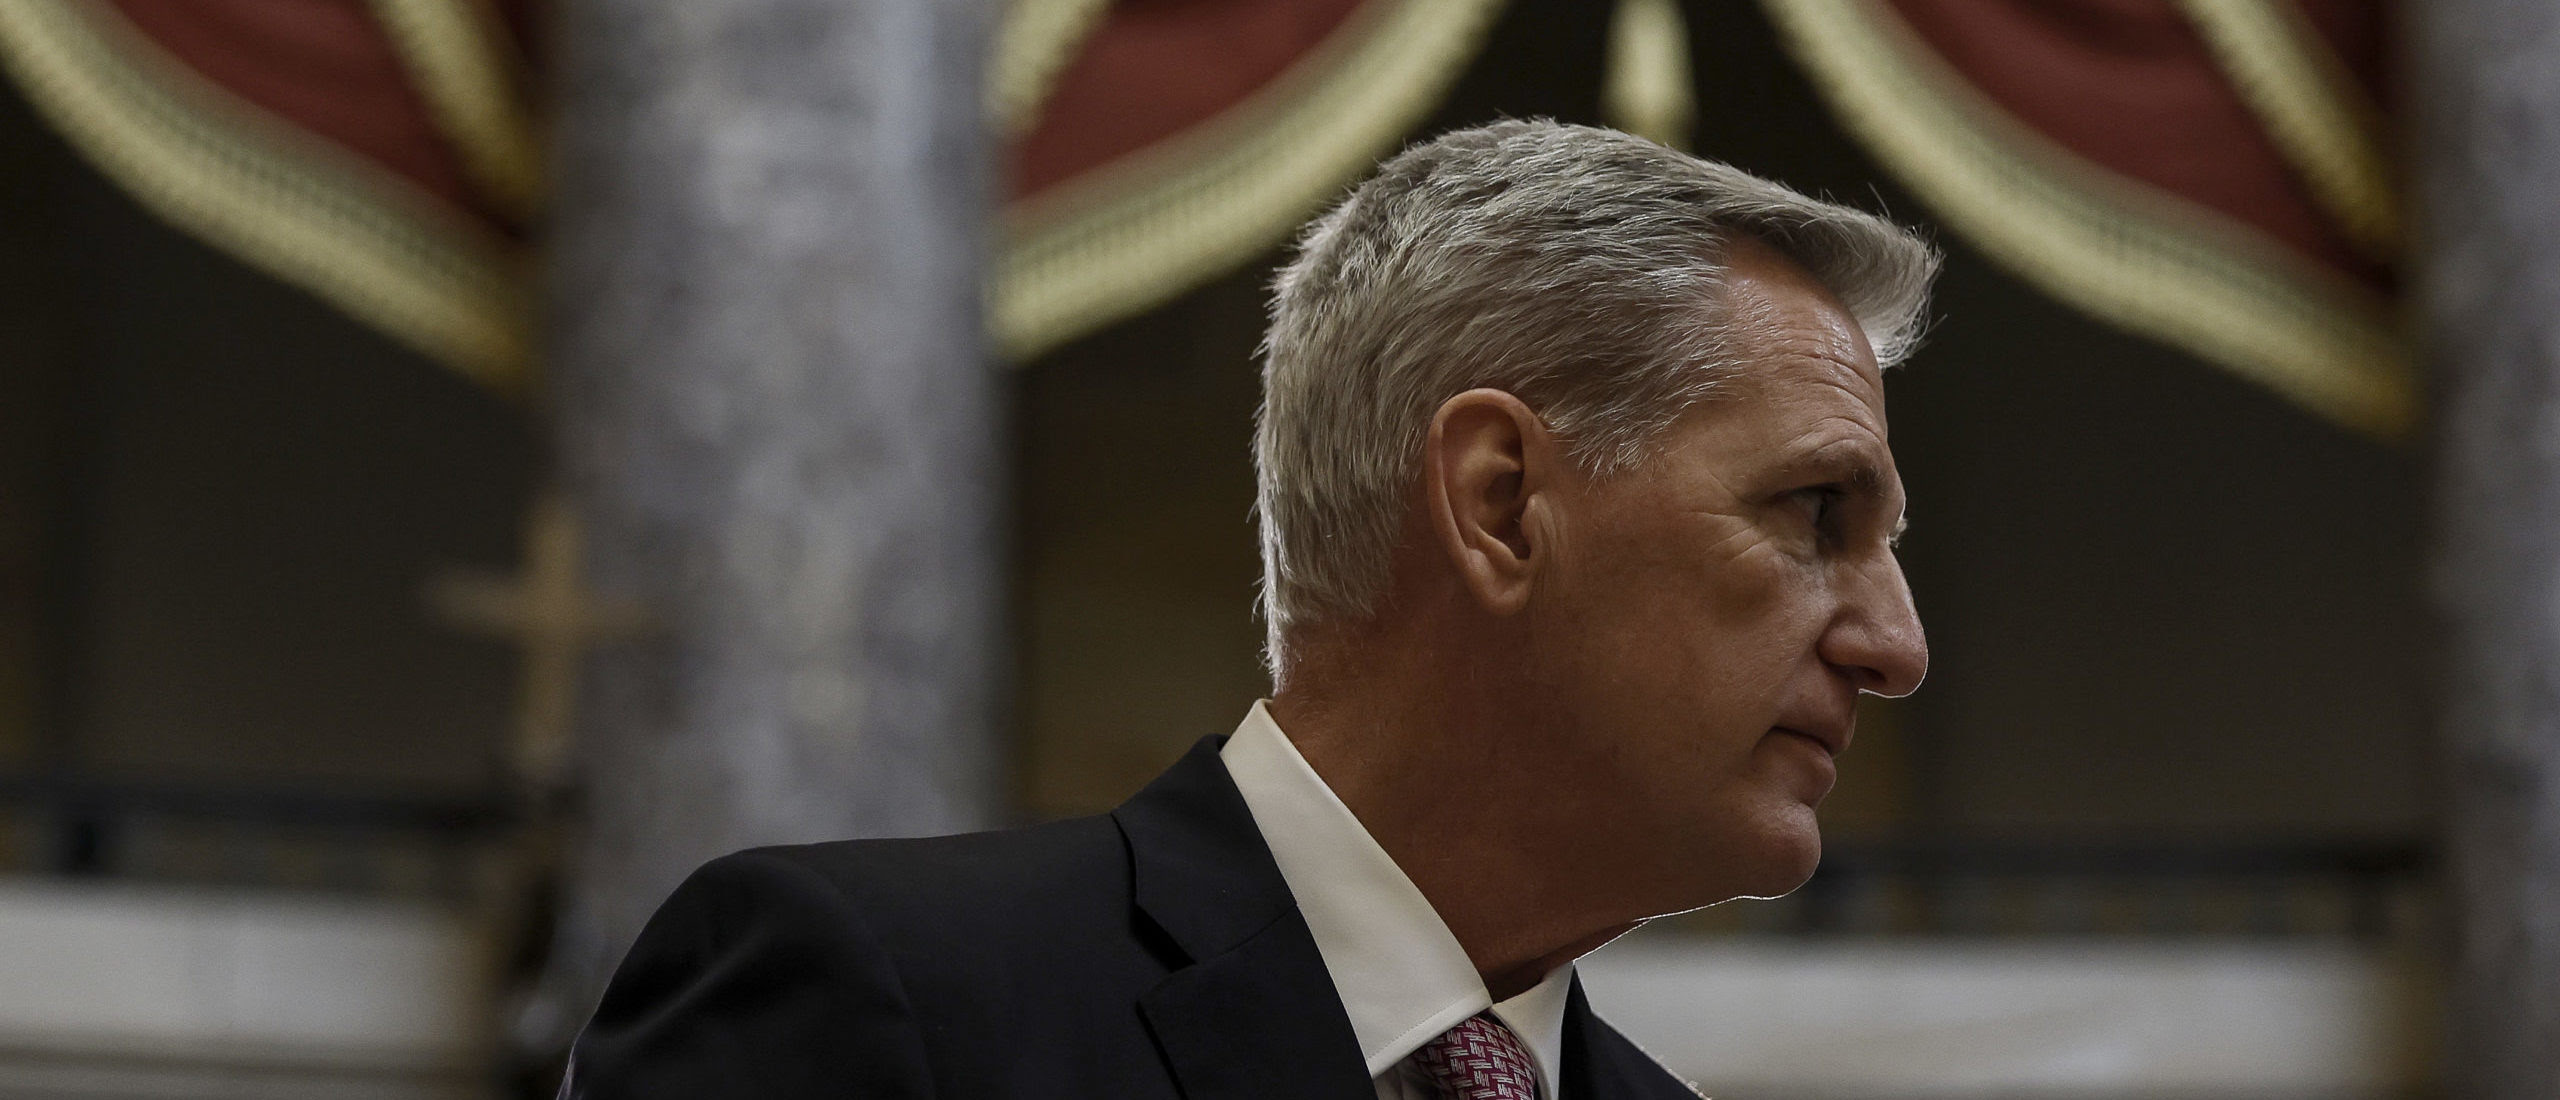 GORDON CHANG: Kevin McCarthy Squares Up Against The ‘World’s Largest Bully’ — China